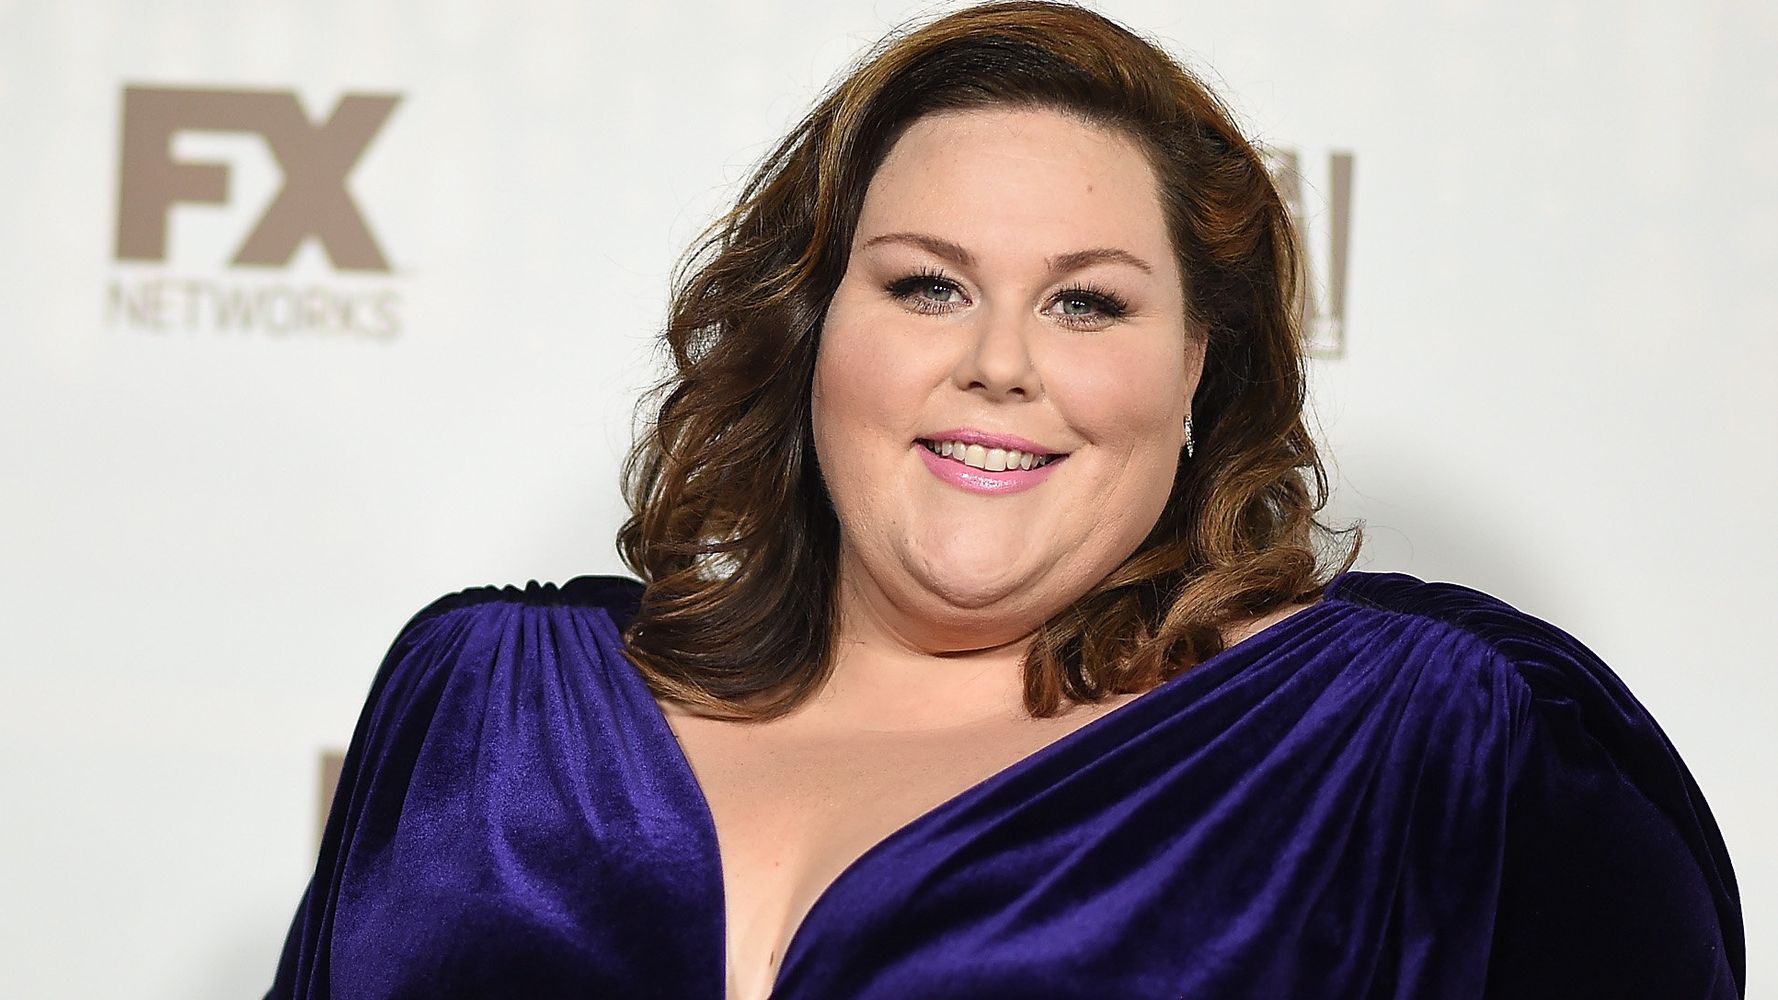 This Is Us Star Chrissy Metz Says Her Relationship With Her Dad Is Strained Huffpost Life